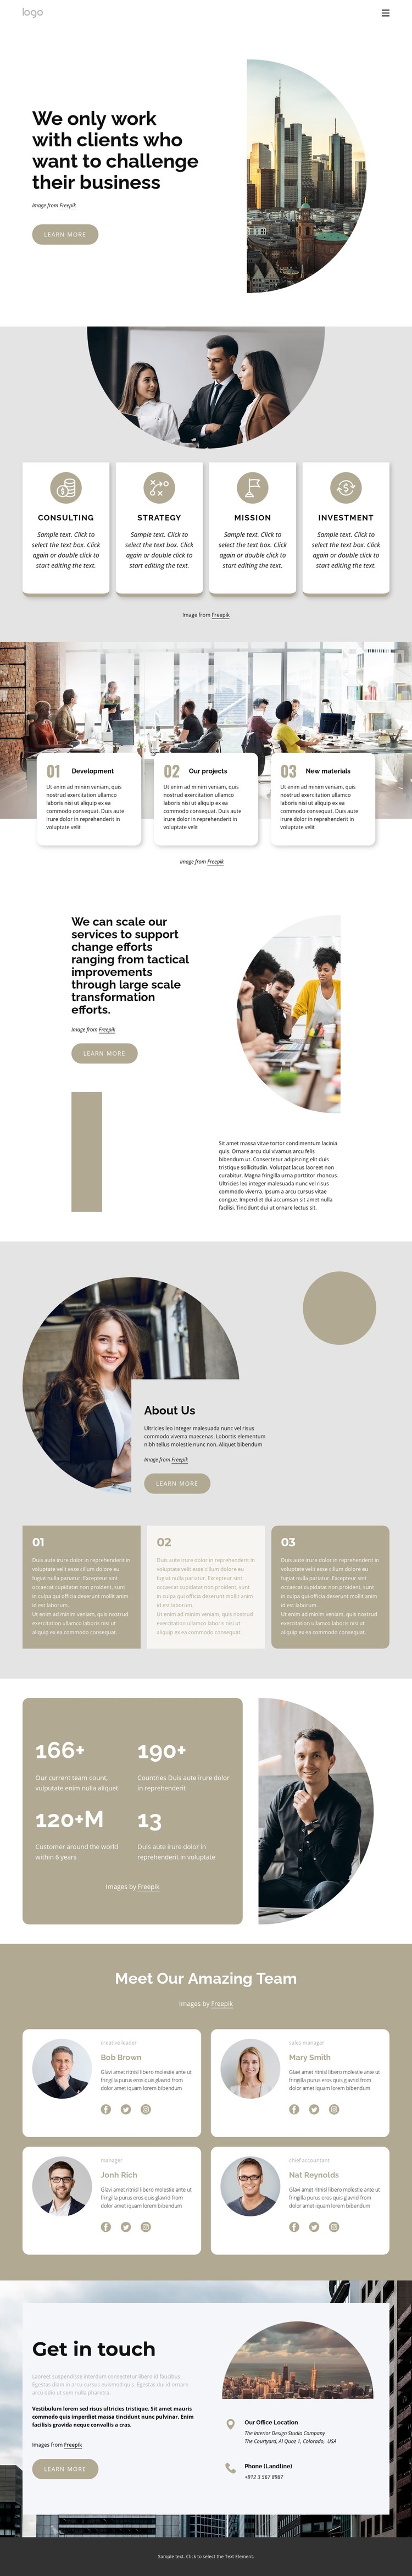 Customer success consultants HTML Template